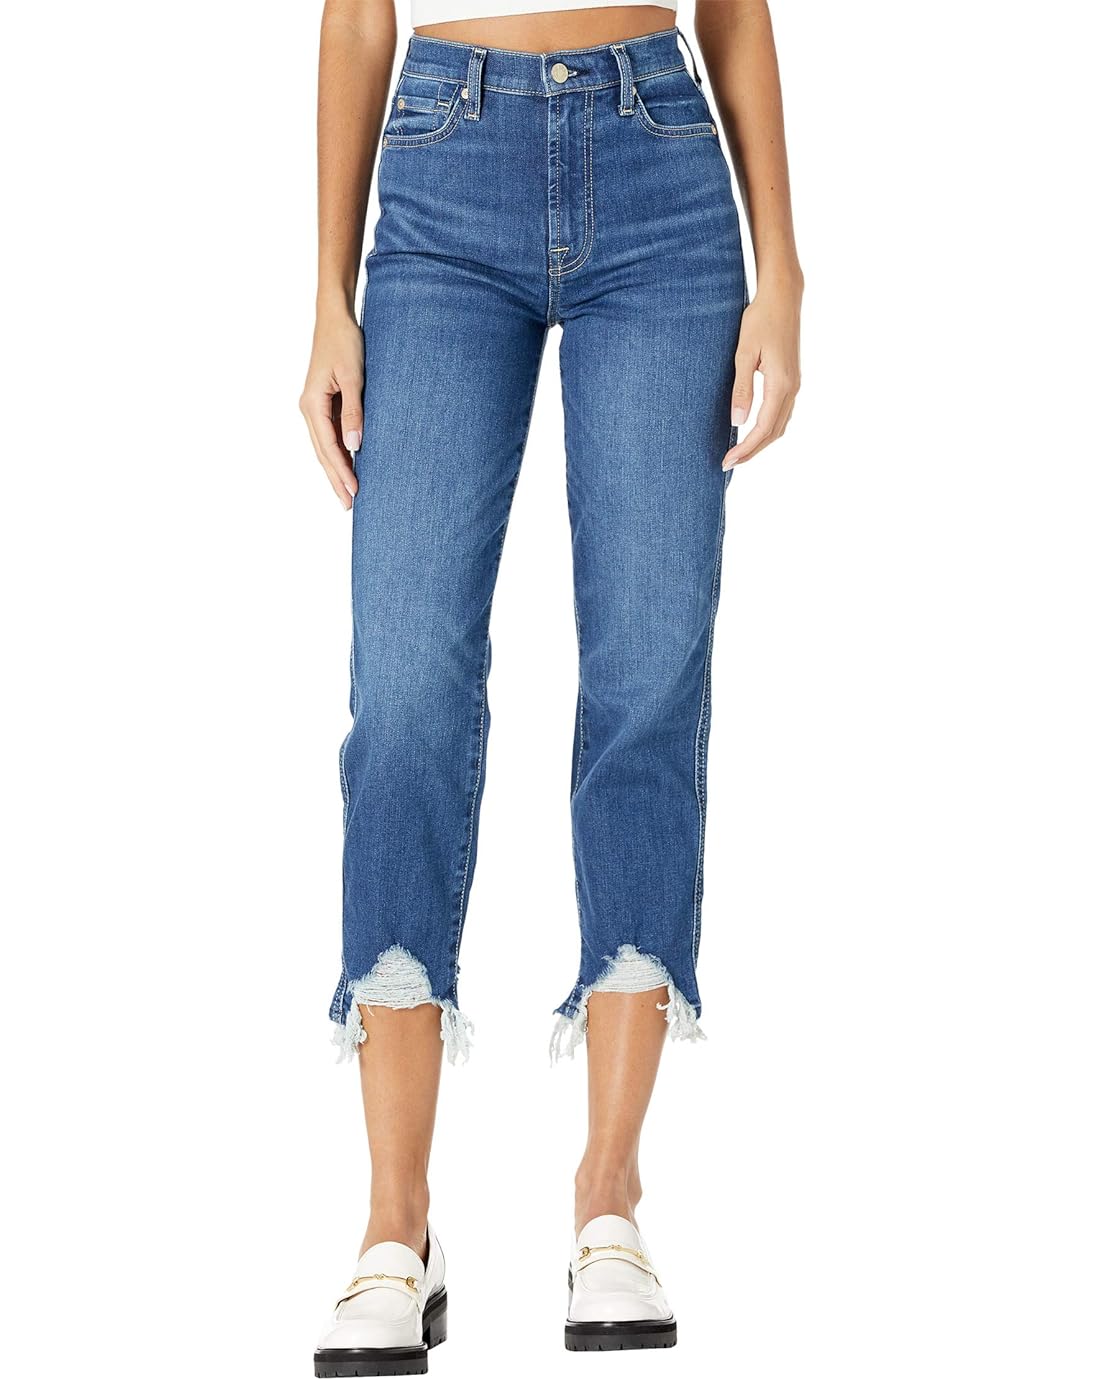 7 For All Mankind High-Waist Cropped Straight in Venus Blue Long Side Hem